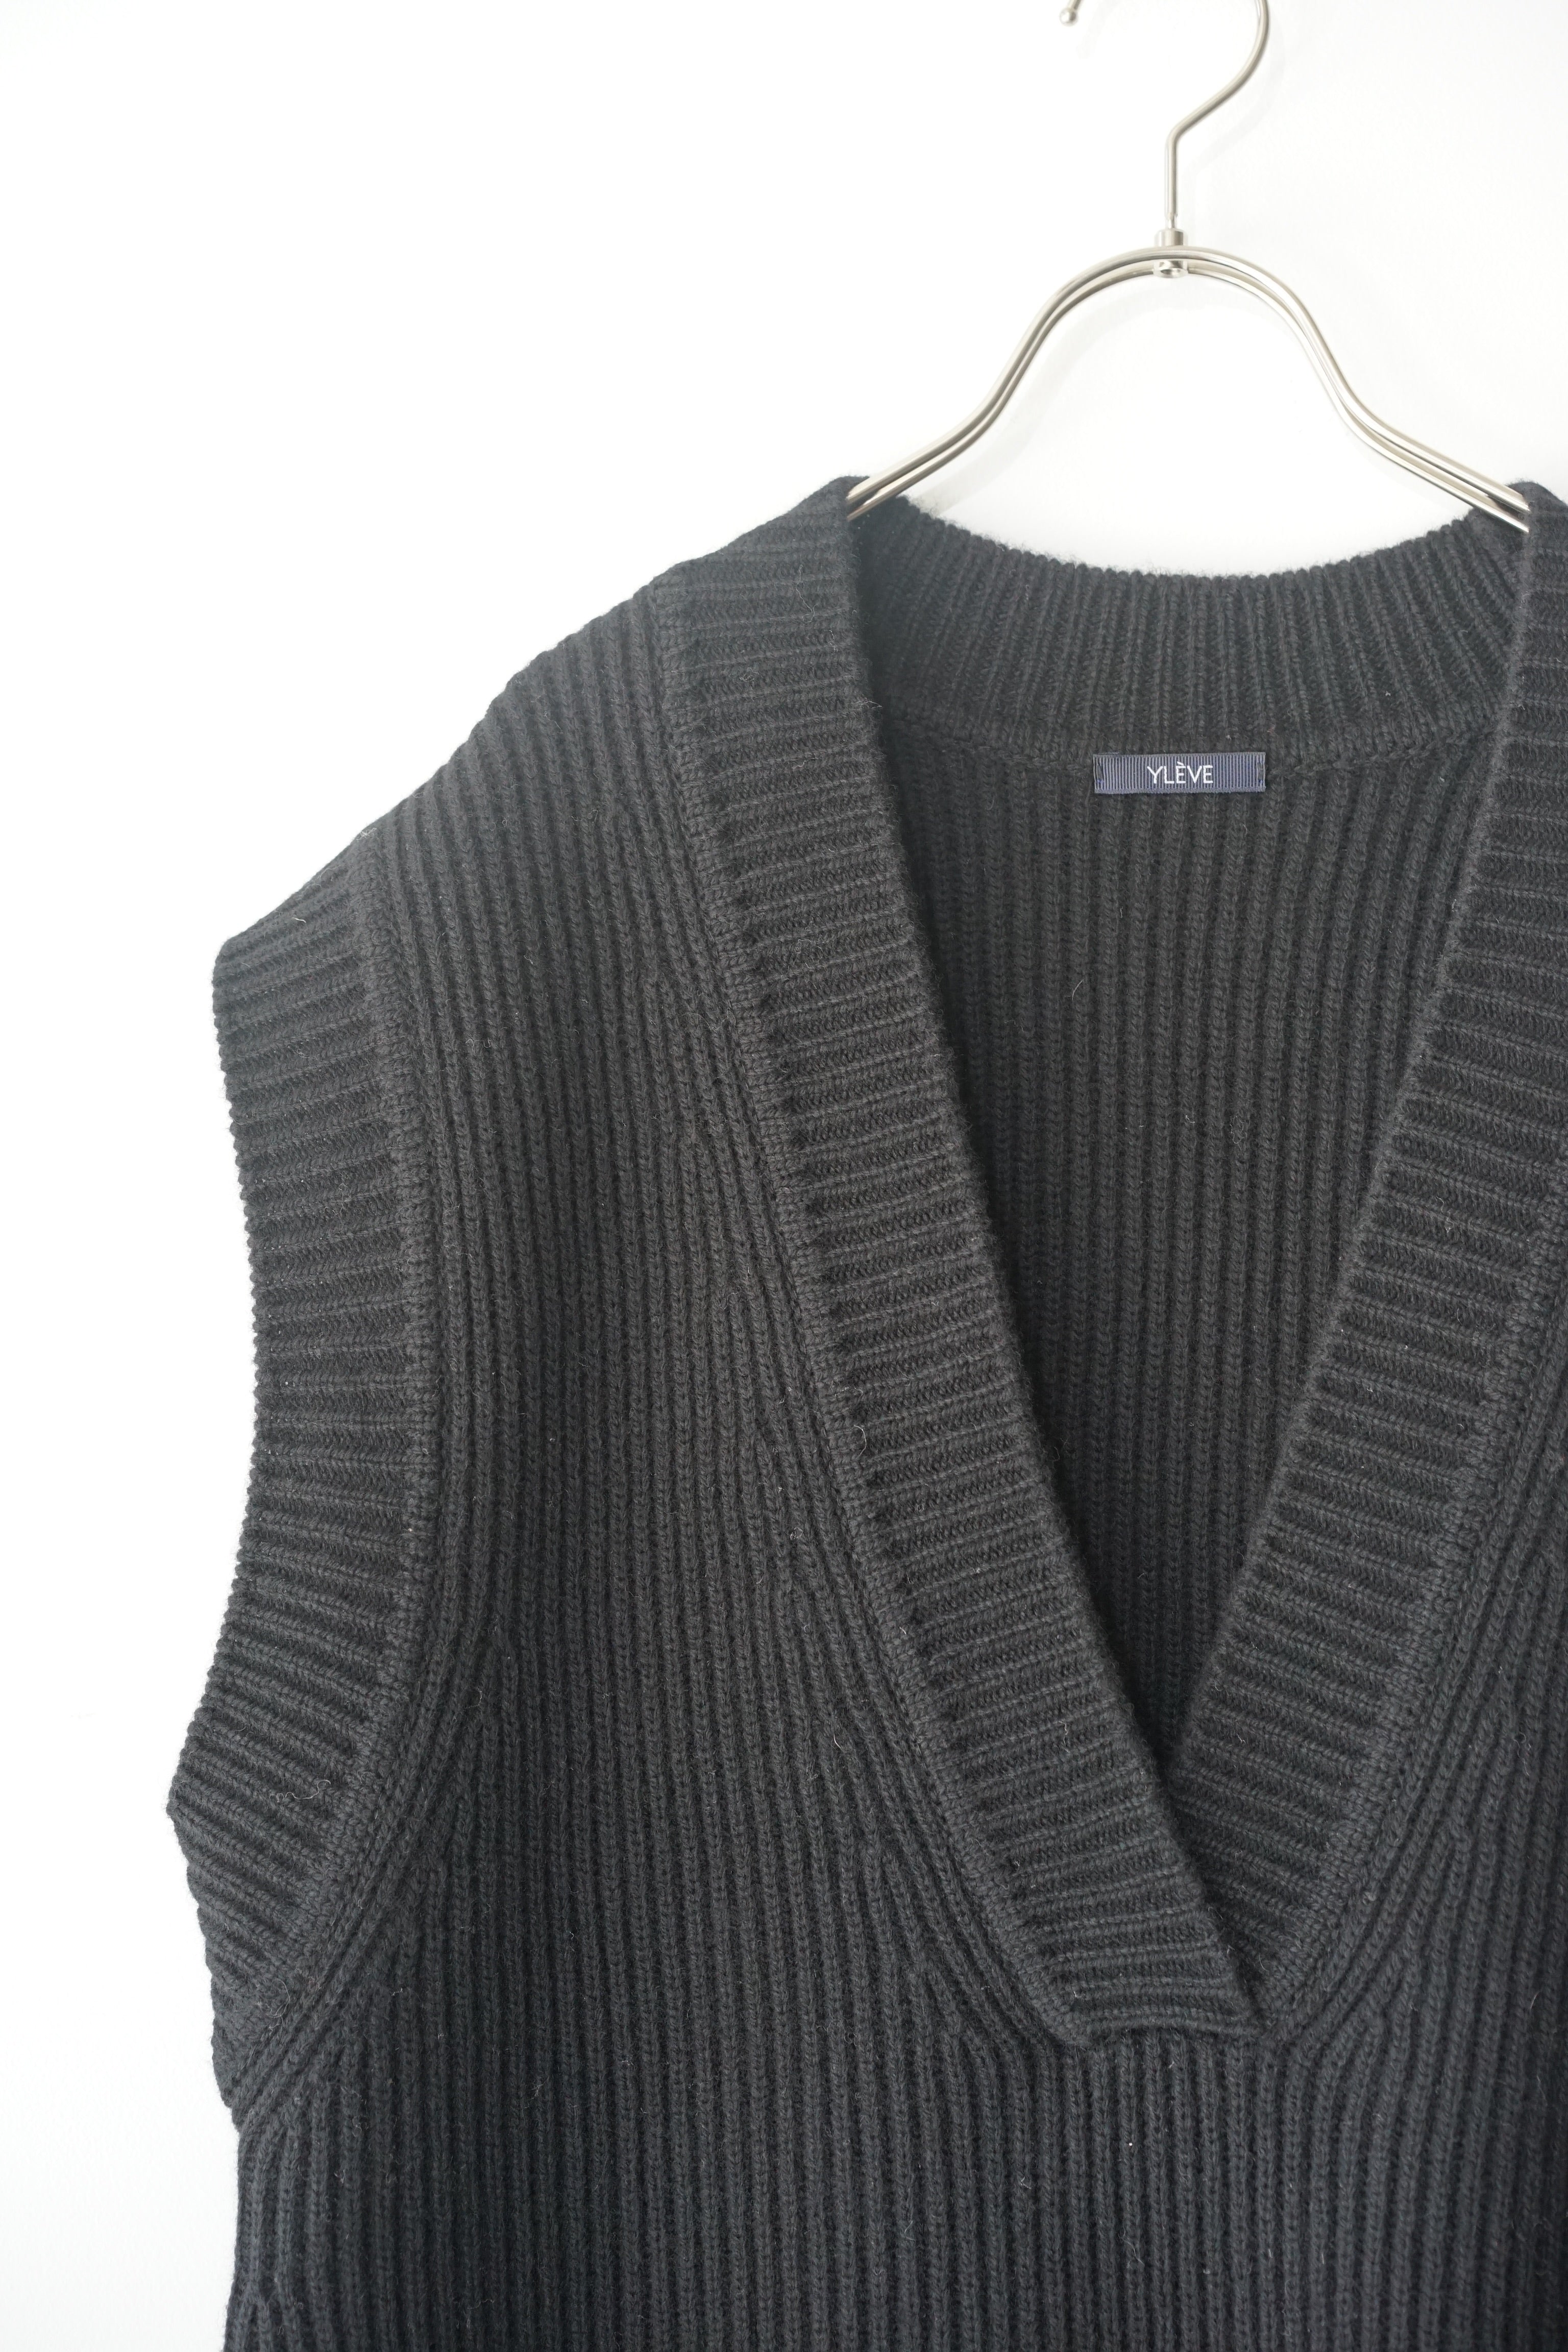 YLEVE】EXTRAFINE MERLNO WOOL KN P/O - トップス